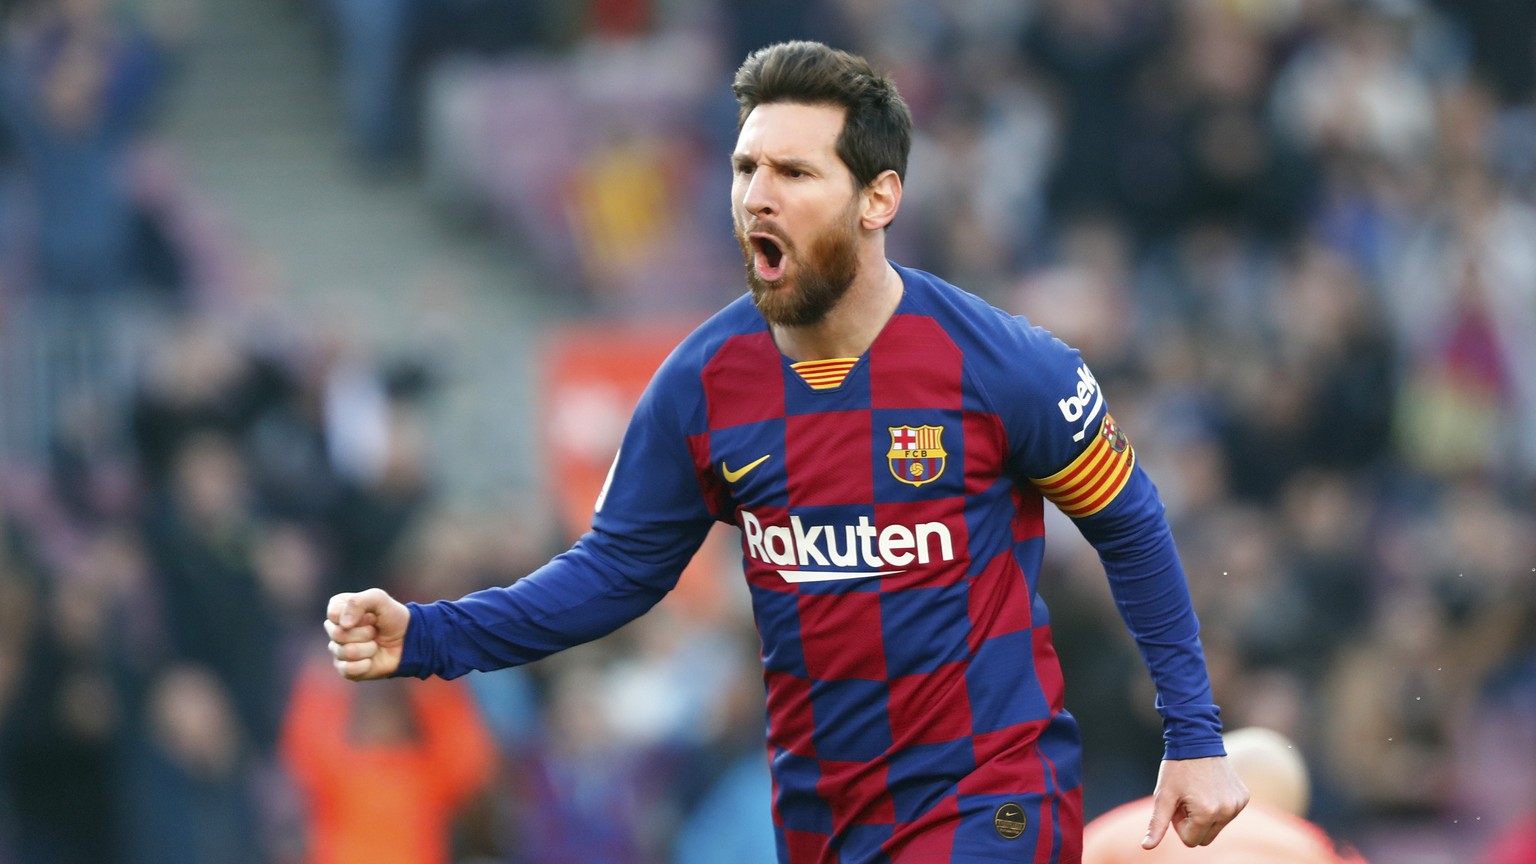 Barcelona&#039;s Lionel Messi celebrates after scoring his side&#039;s opening goal during a Spanish La Liga soccer match between Barcelona and Eibar at the Camp Nou stadium in Barcelona, Spain, Satur ...